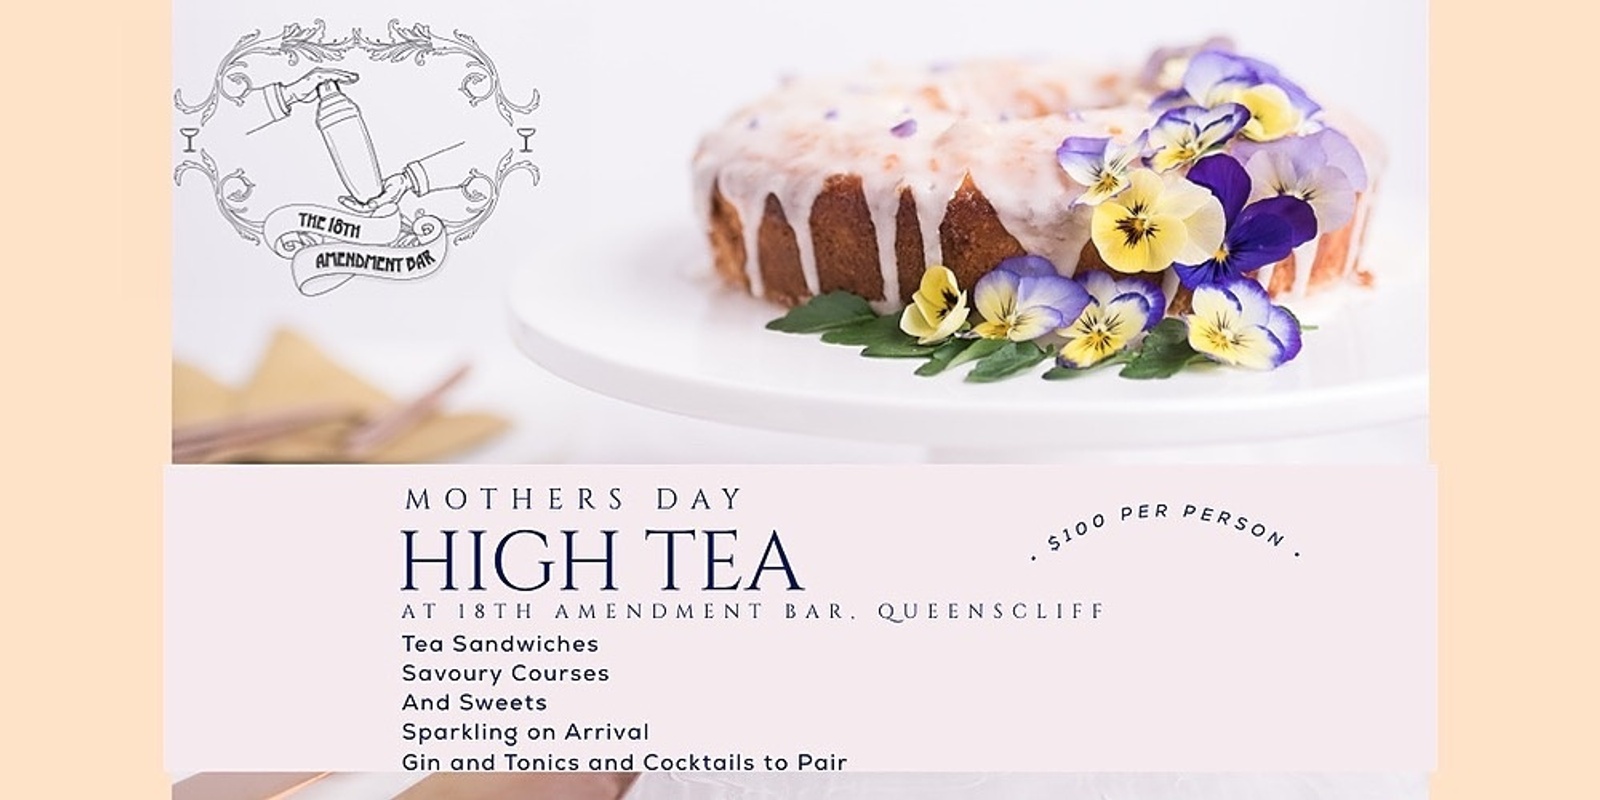 Banner image for Mothers Day Afternoon High Tea at The 18th Amendment Bar, Queenscliff